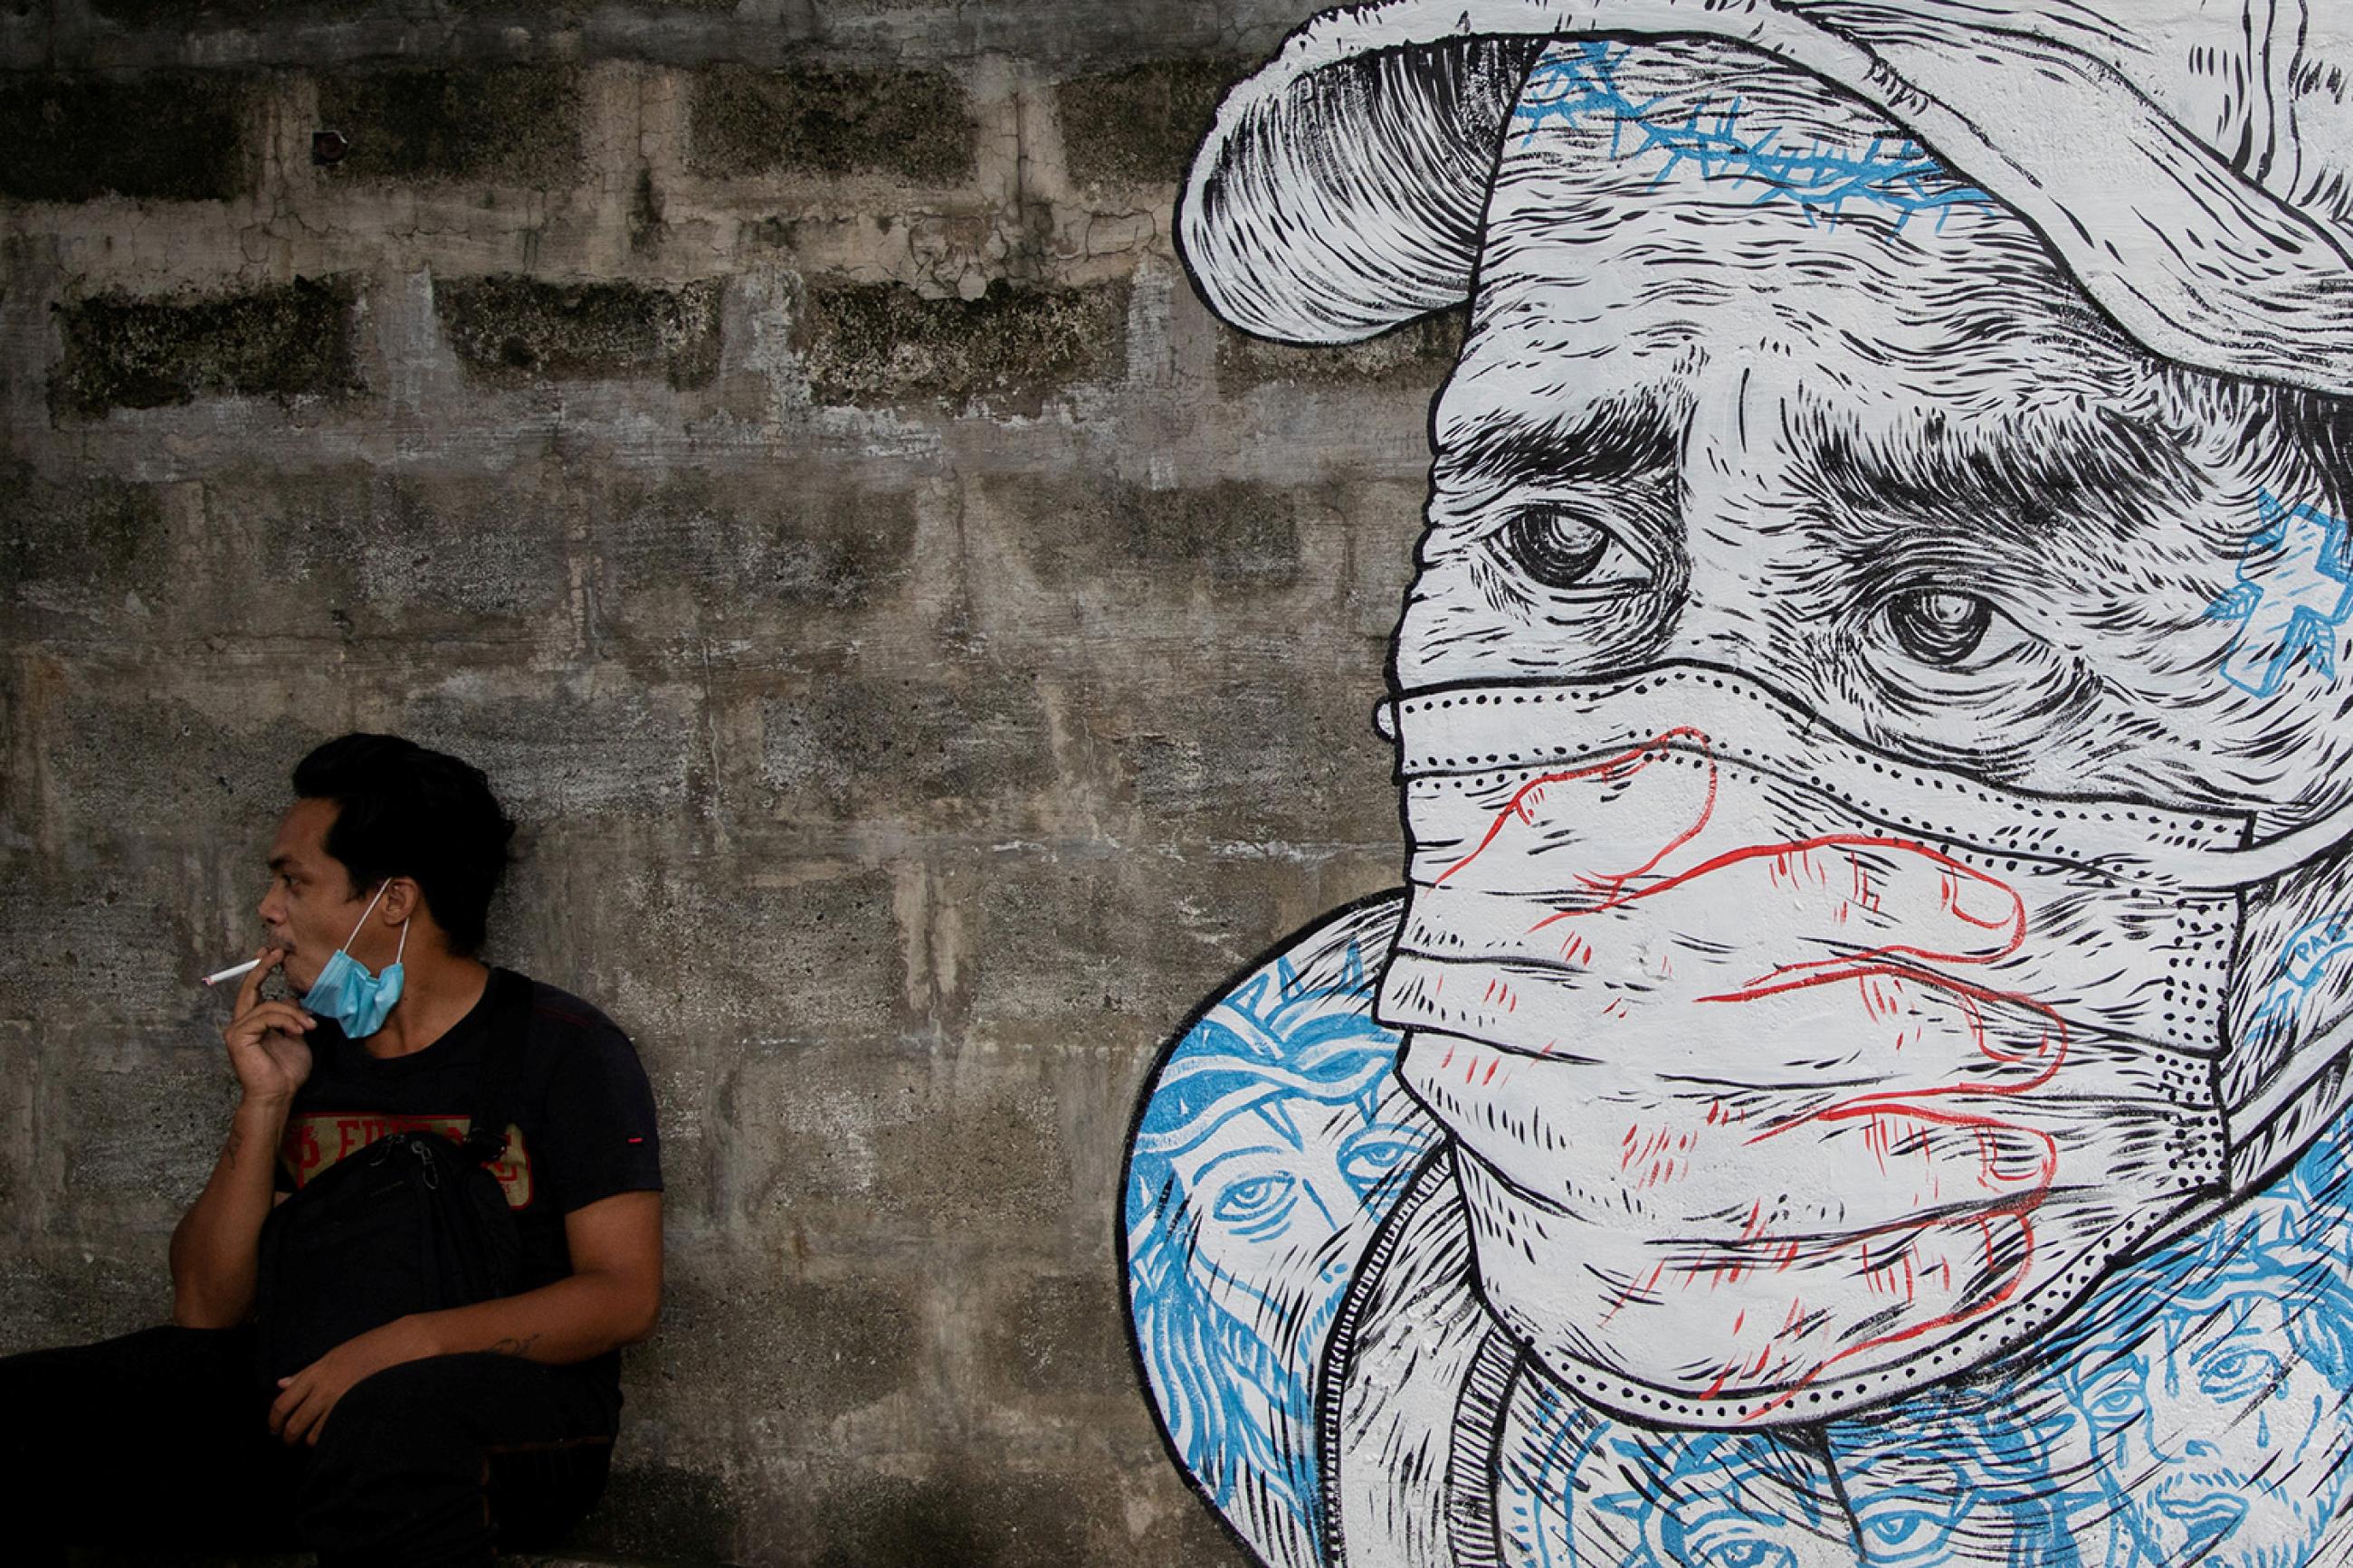 A man smokes a cigarette next to a mural of a man wearing a protective mask amid the coronavirus disease (COVID-19) outbreak in Quezon City, Metro Manila, Philippines, July 30, 2020. The photo shows a man wearing a mask pulled down around his chin smoking. Next to him is a mural of a worried-looking man in a mask. REUTERS/Eloisa Lopez